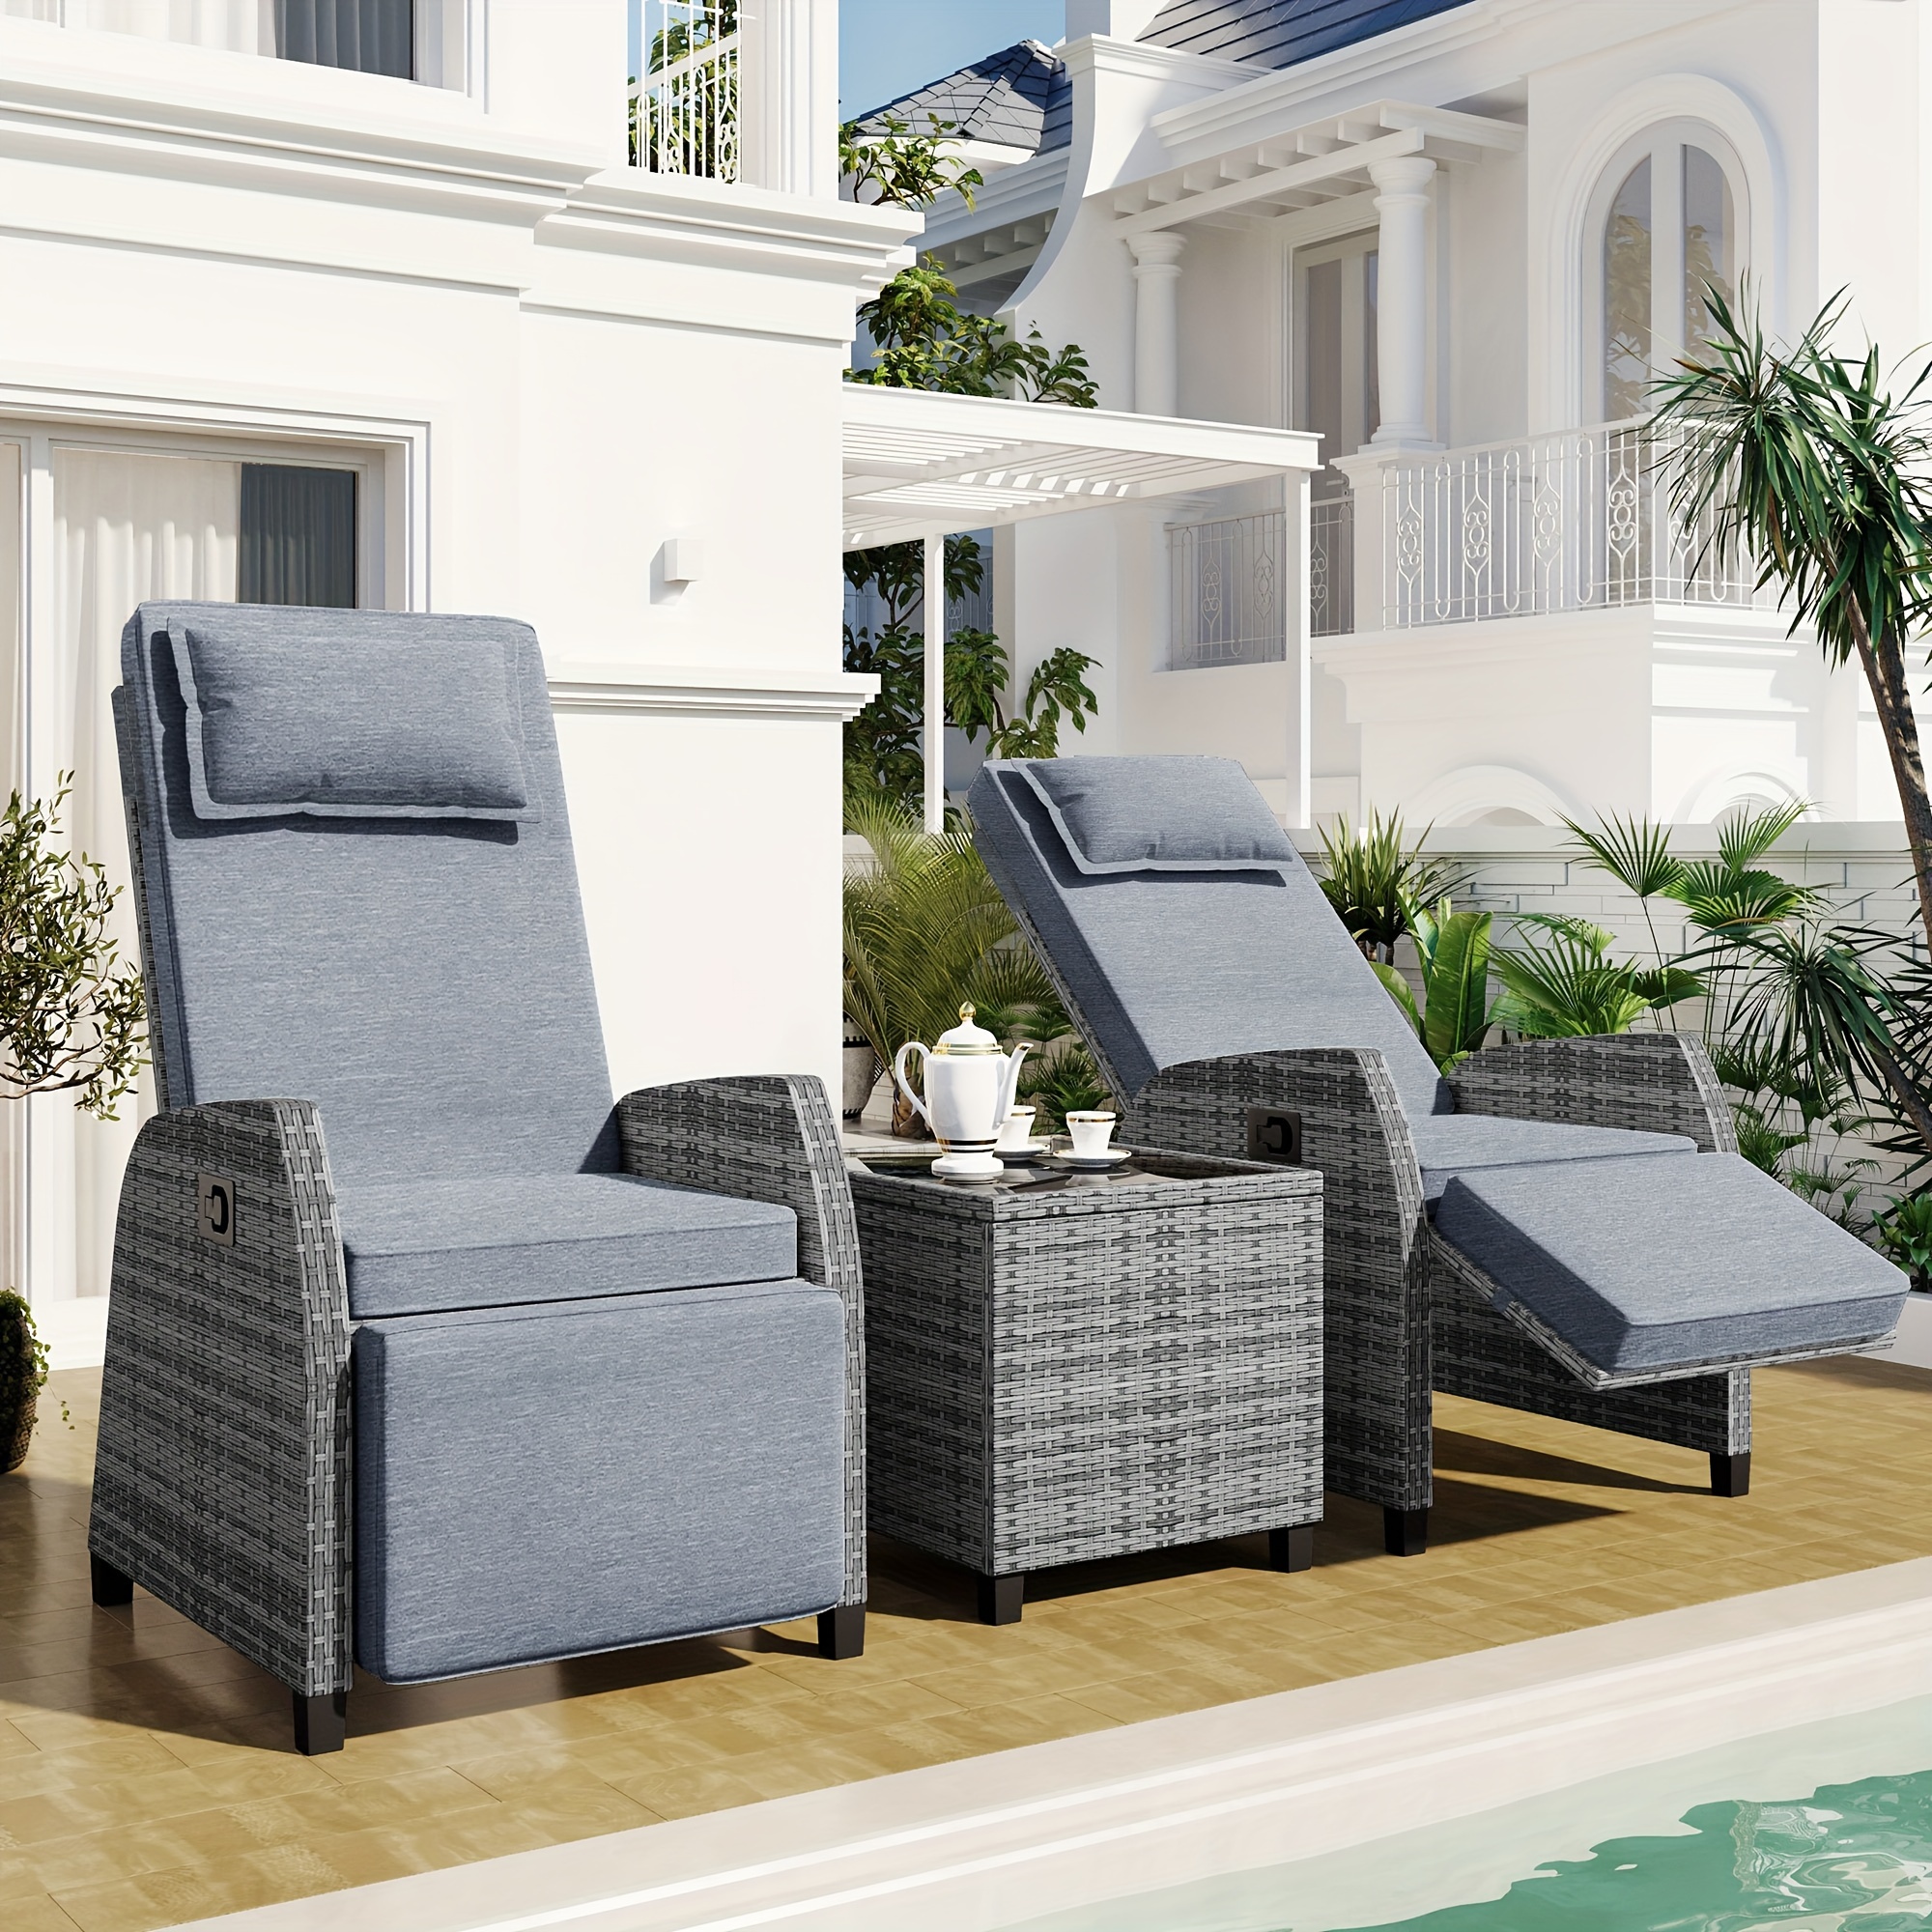 

3-piece Outdoor Rattan Combination Set With Adjustable Lounge Chair And Coffee Table, Suitable For Patios, Swimming Pools, And Balconies